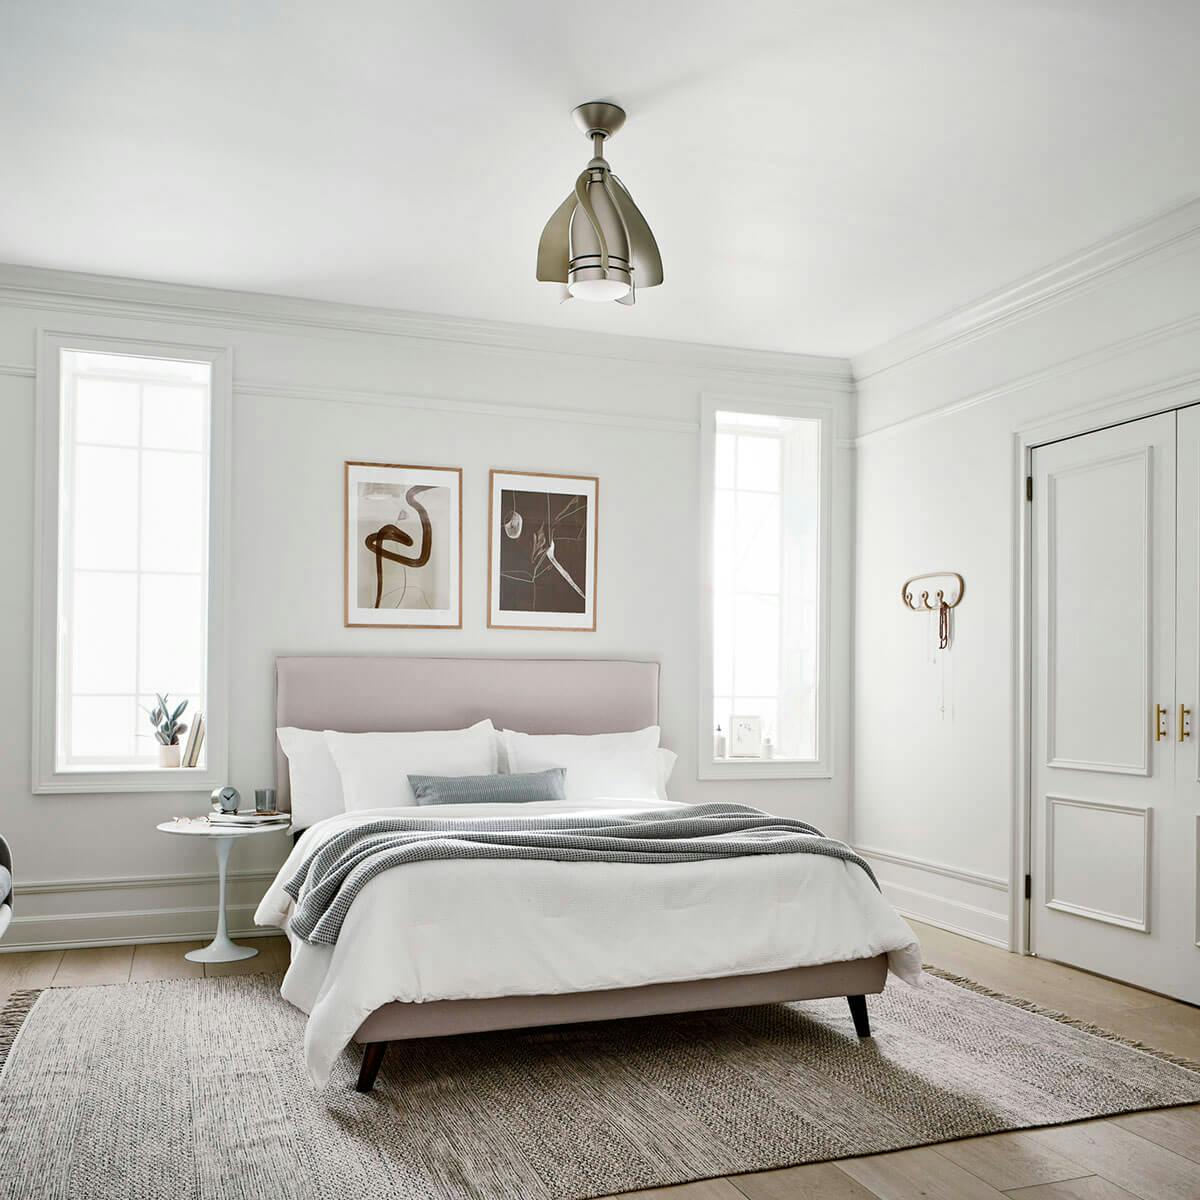 Day timebedroom image featuring Terna 300230NI